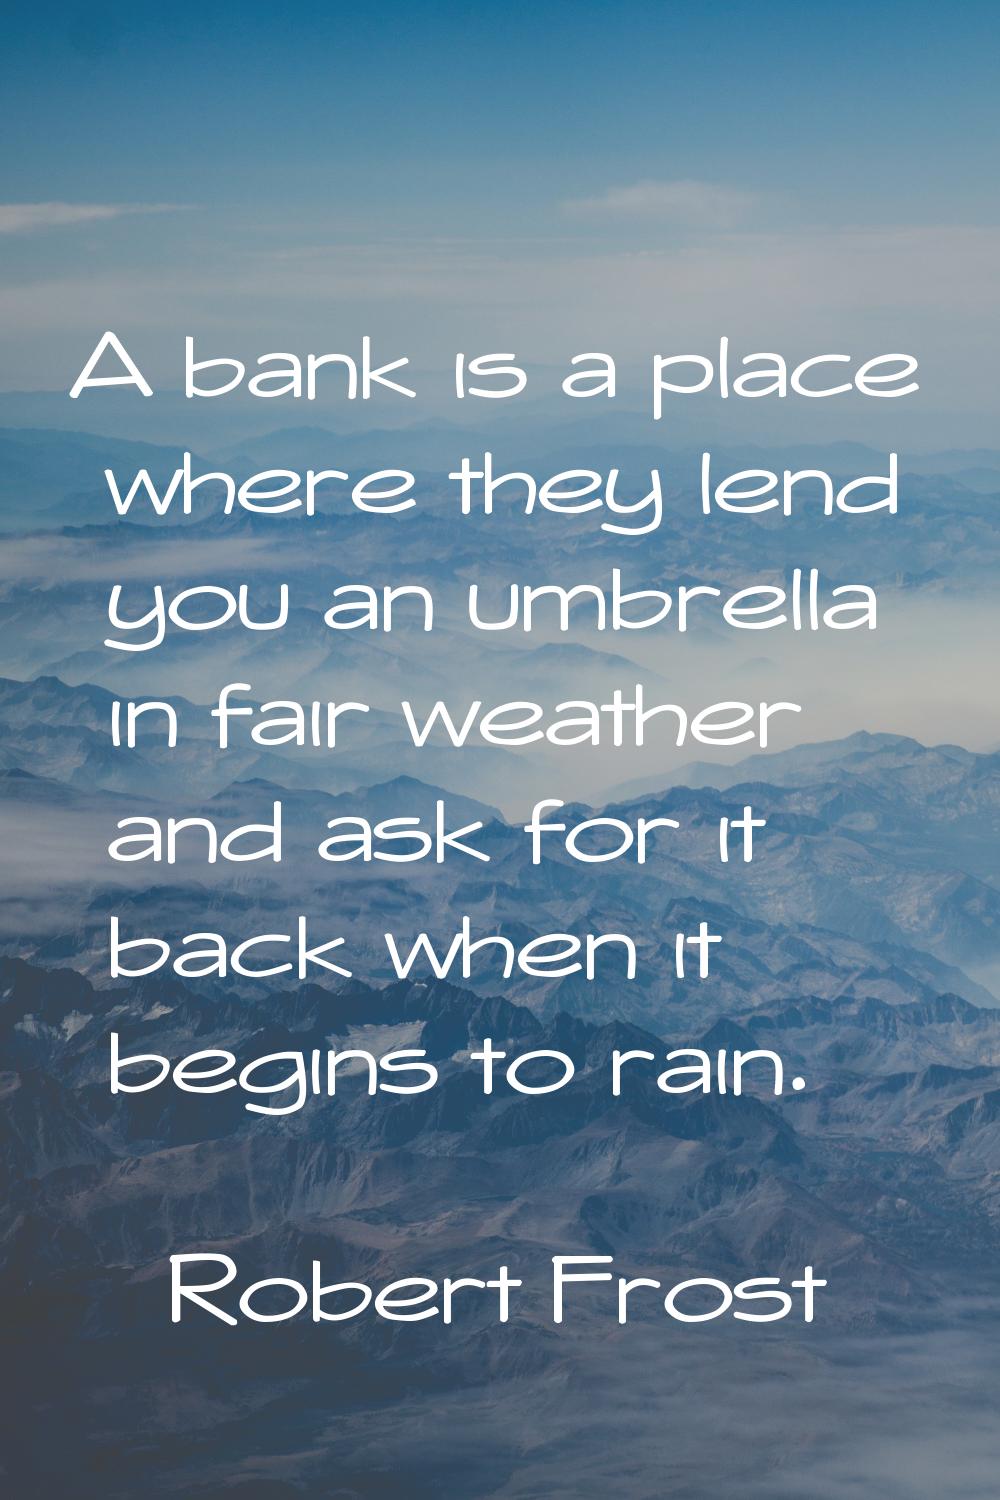 A bank is a place where they lend you an umbrella in fair weather and ask for it back when it begin